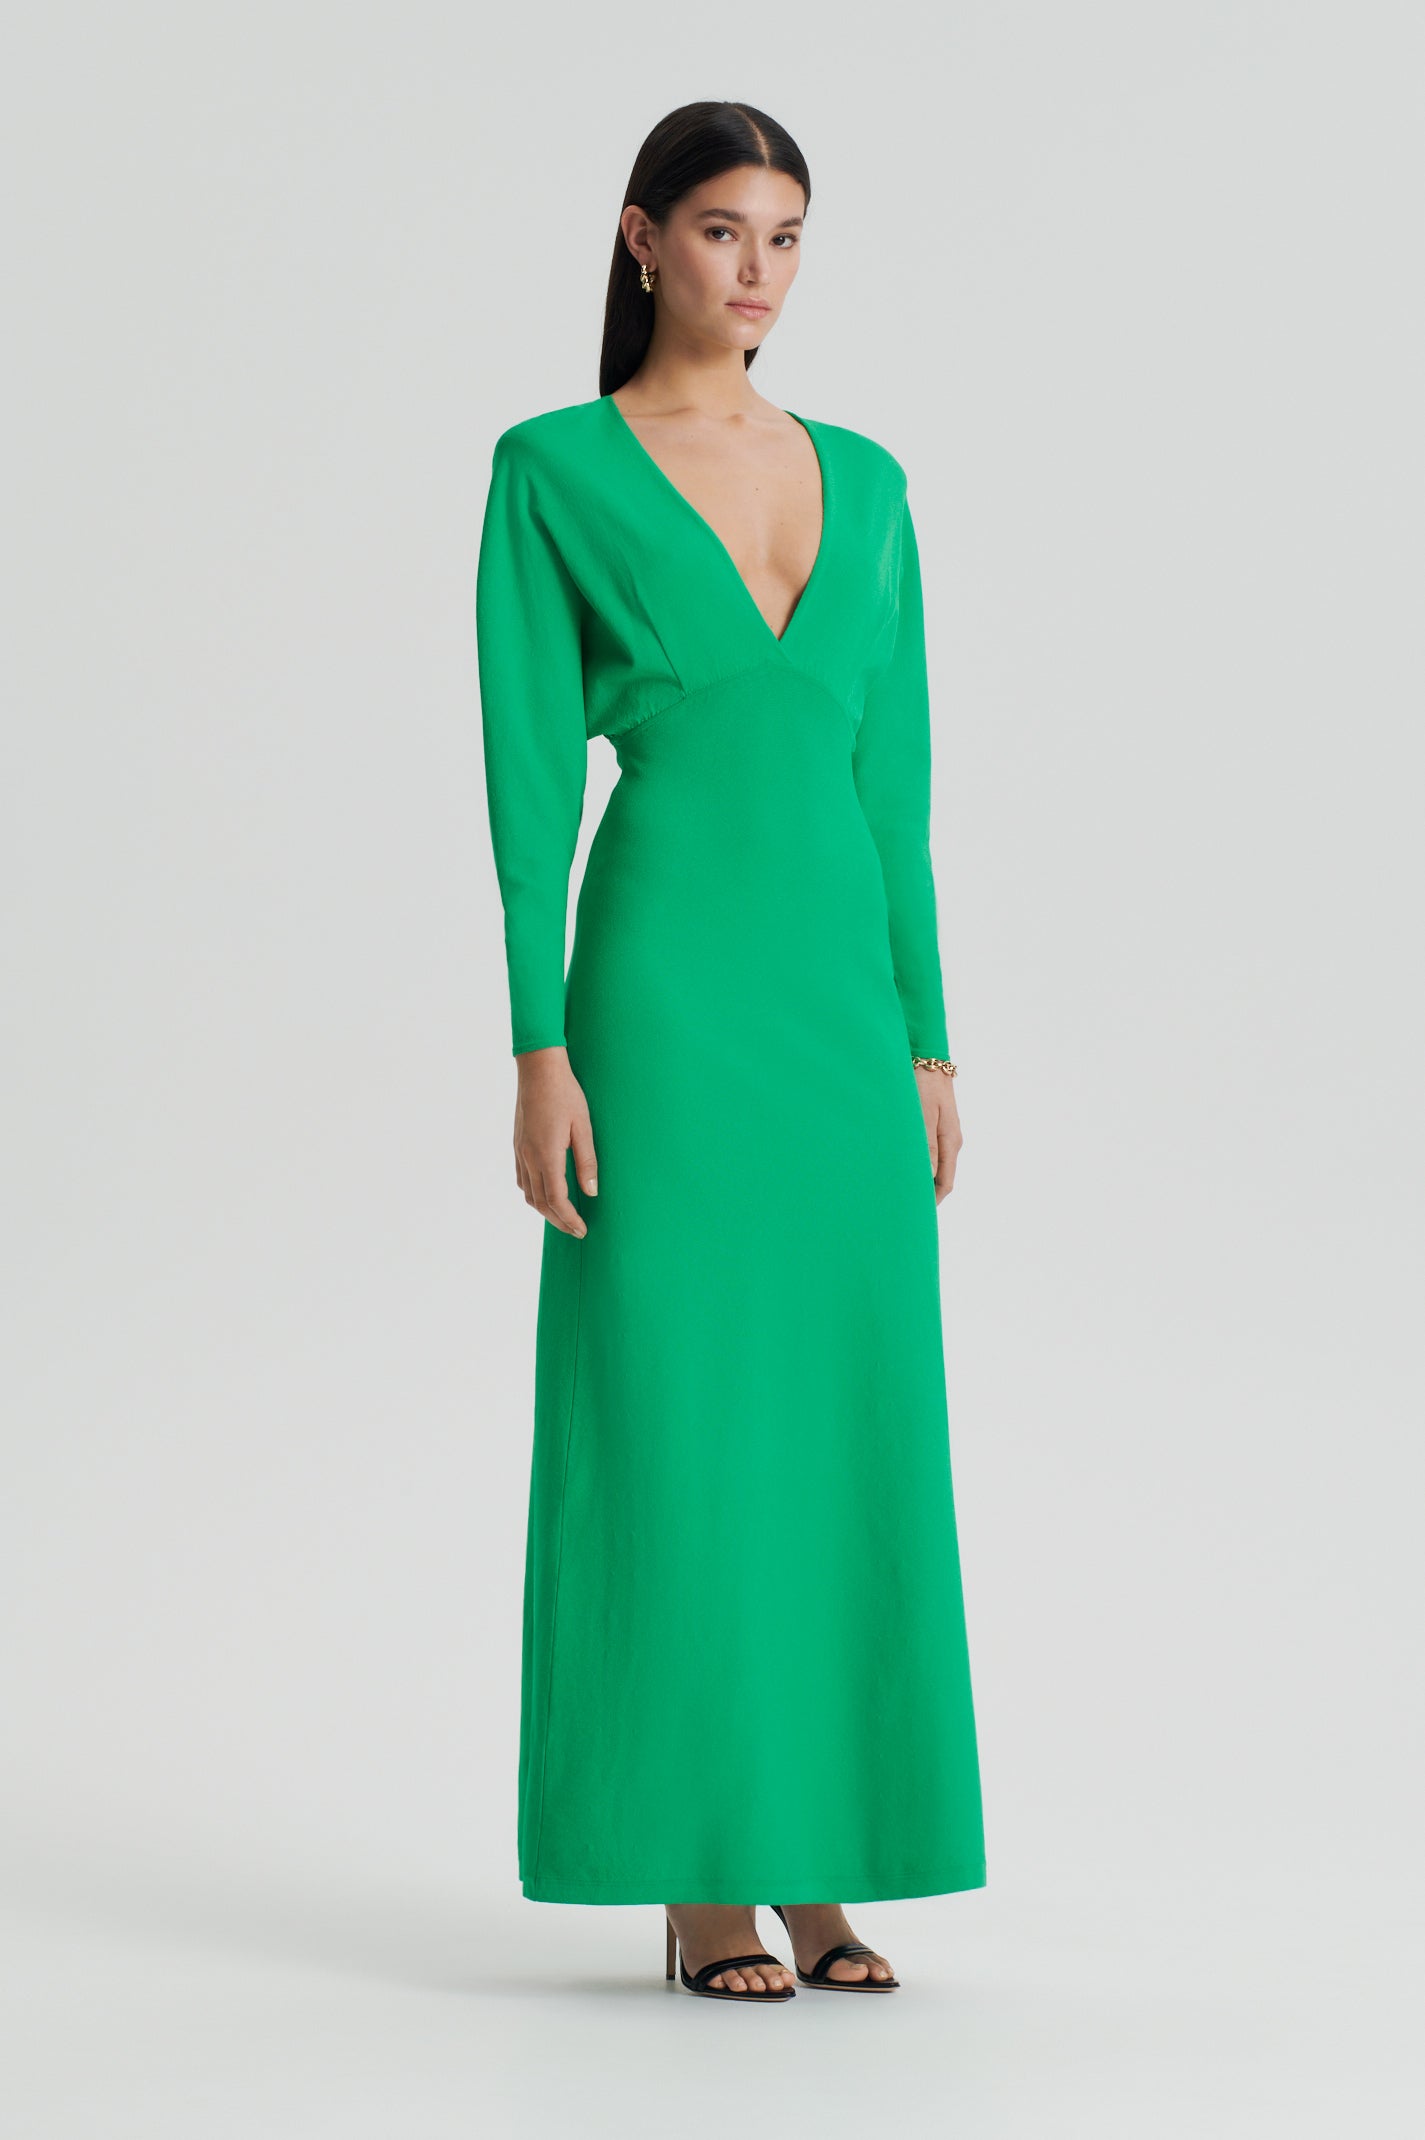 CREPE KNIT DOLMAN SLEEVE GOWN - GREEN - Scanlan Theodore